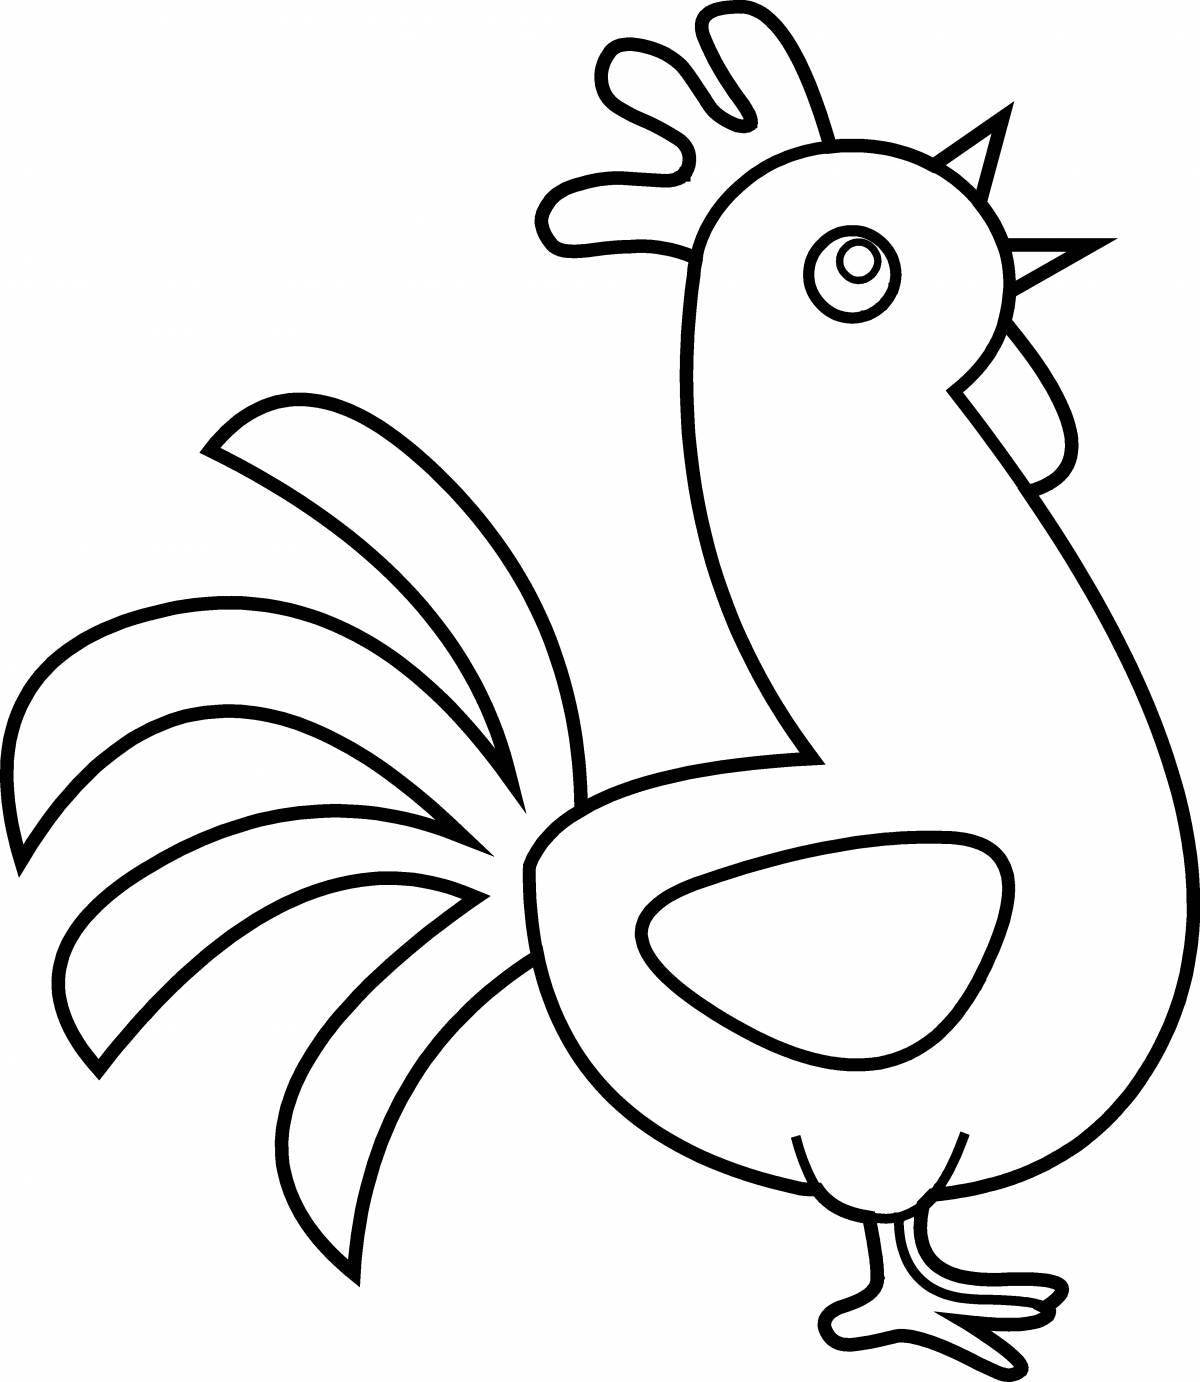 Fun rooster coloring for toddlers